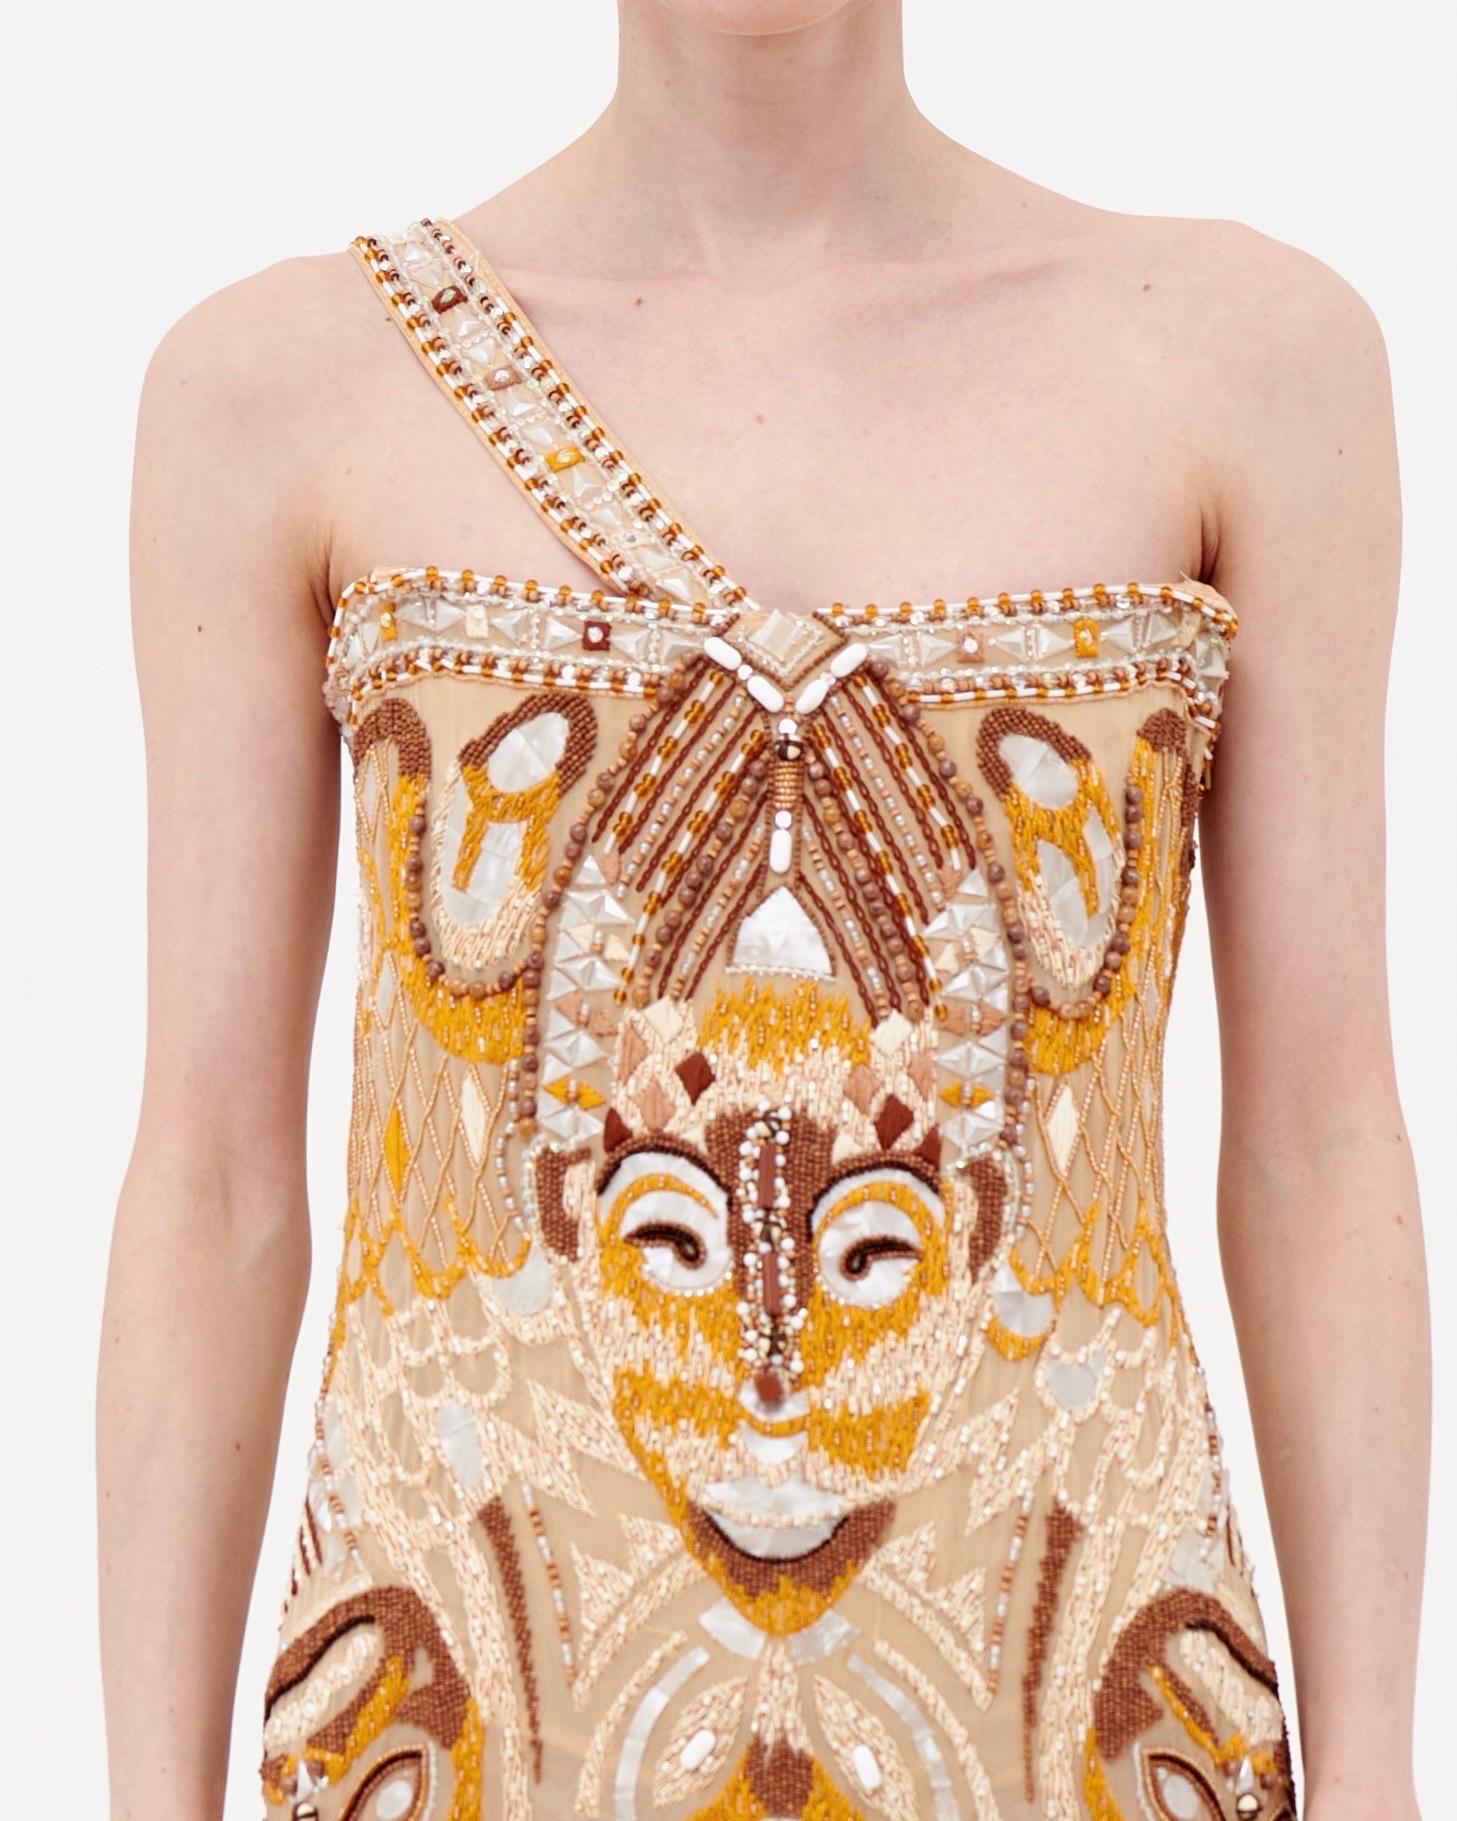 Beige Roberto Cavalli S/S 2005 heavily beaded tribal mask corseted dress For Sale